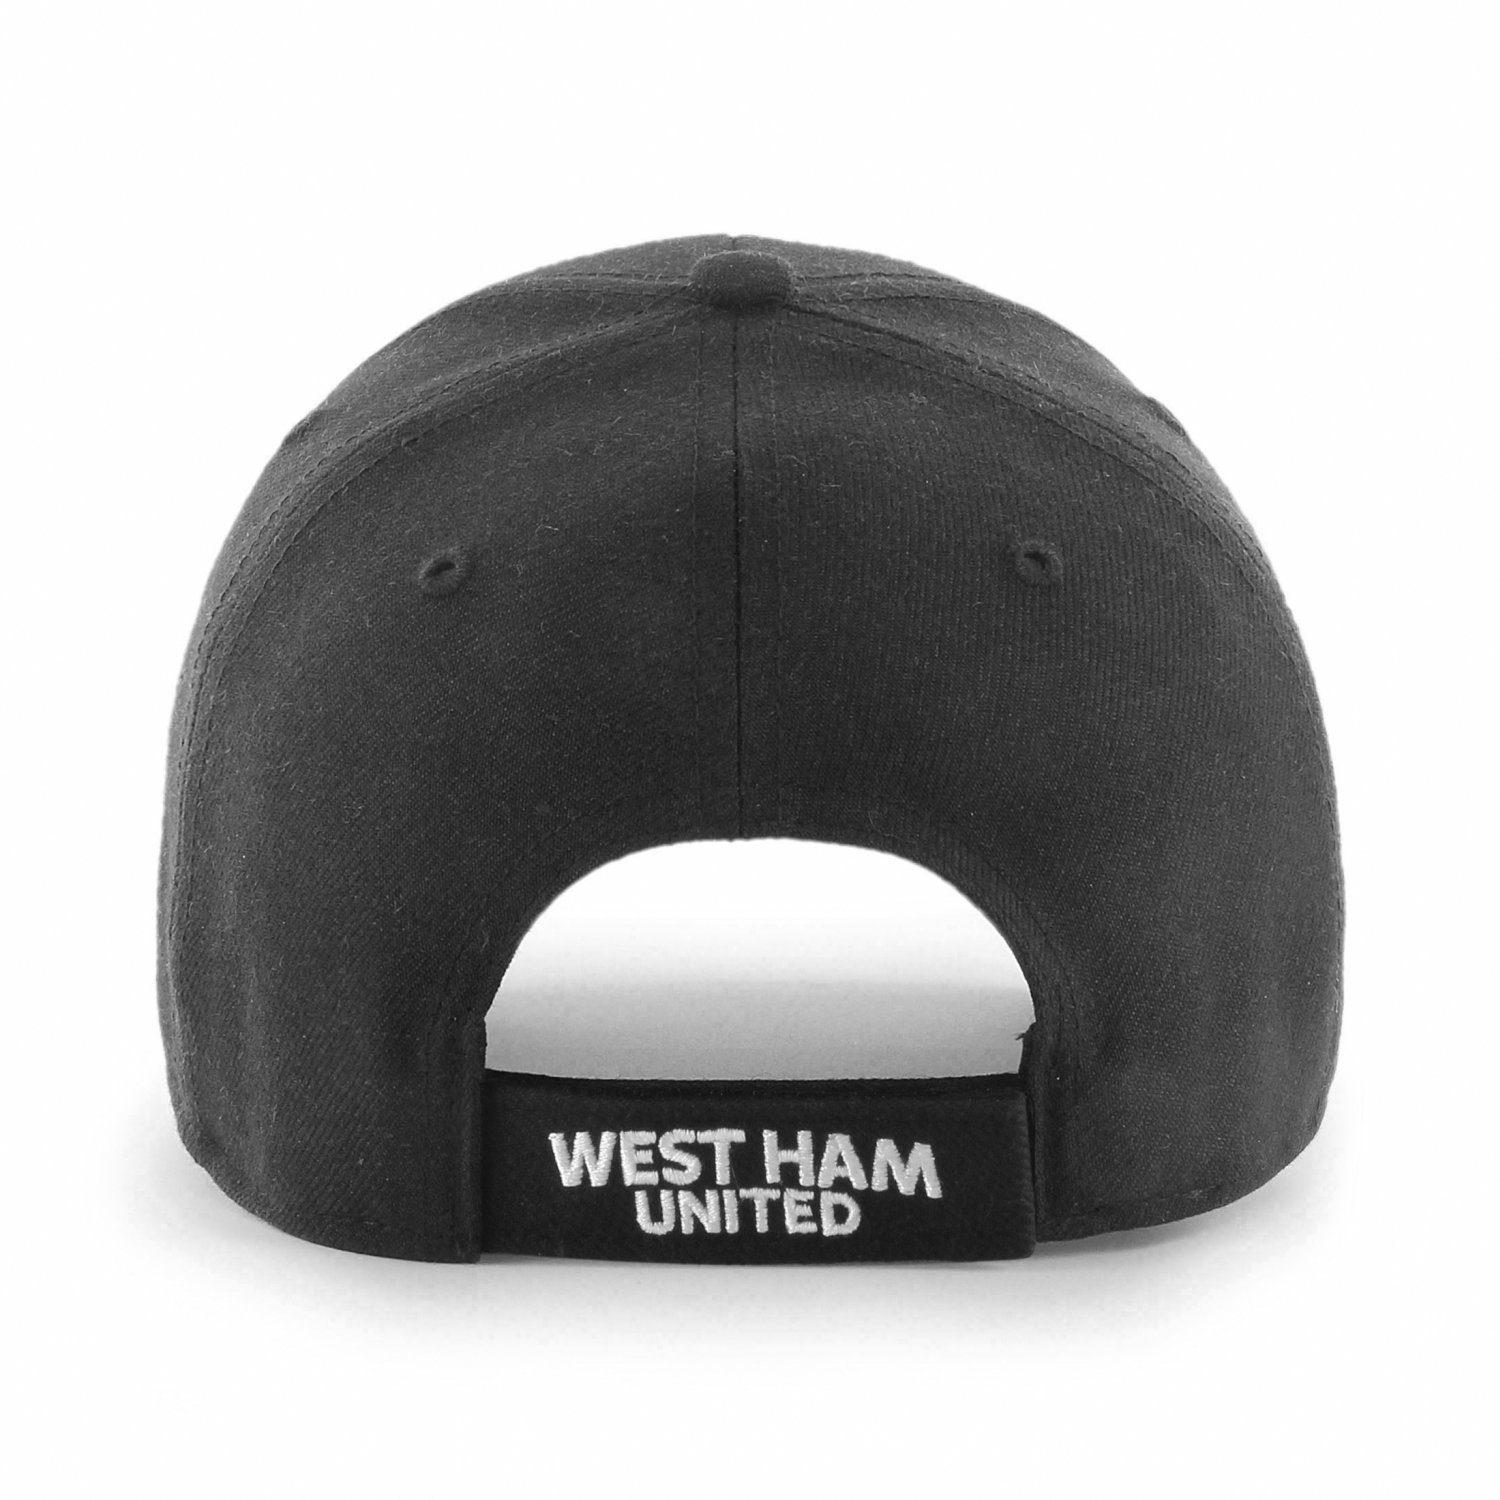 x27;47 Brand Trucker Cap Relaxed United Fit Ham West